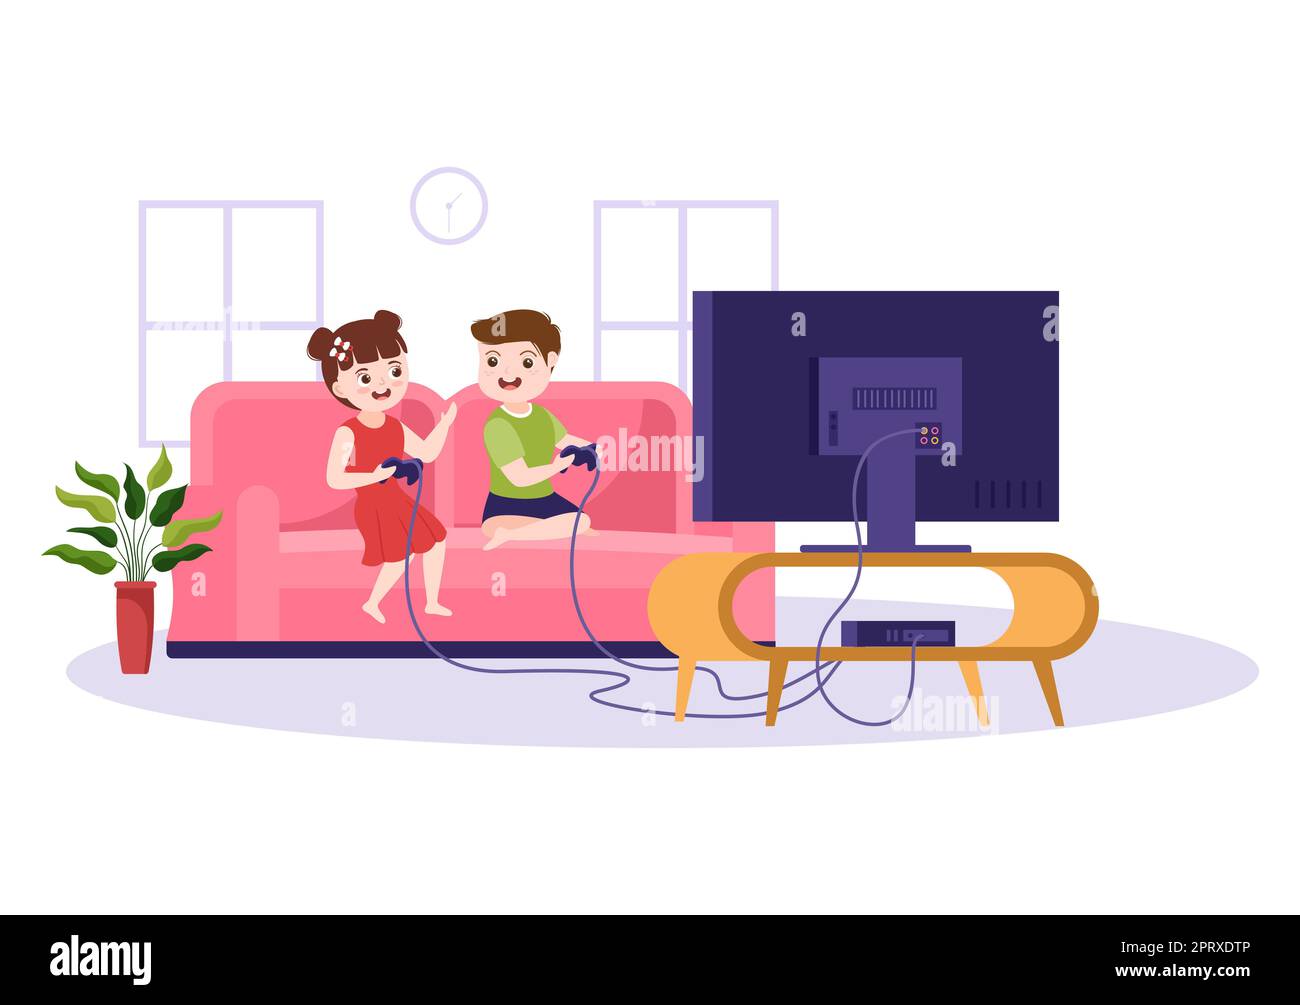 Video Game with Kids Playing Gamepad Controllers Fighting Console on Android Mobile Computer in Flat Cartoon Hand Drawn Template Illustration Stock Photo